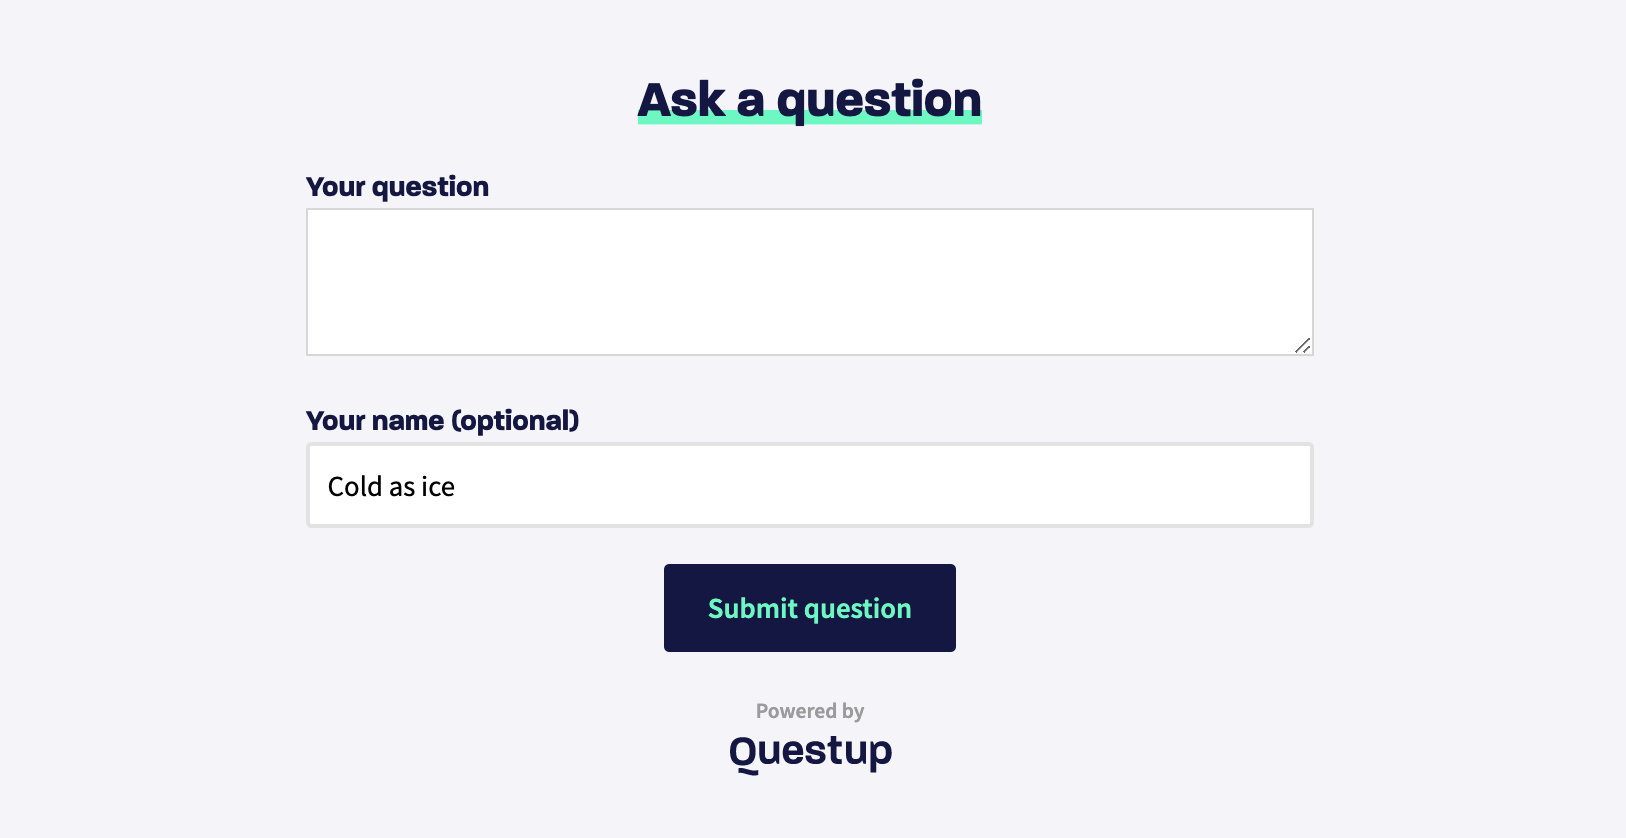 Know more about Questup